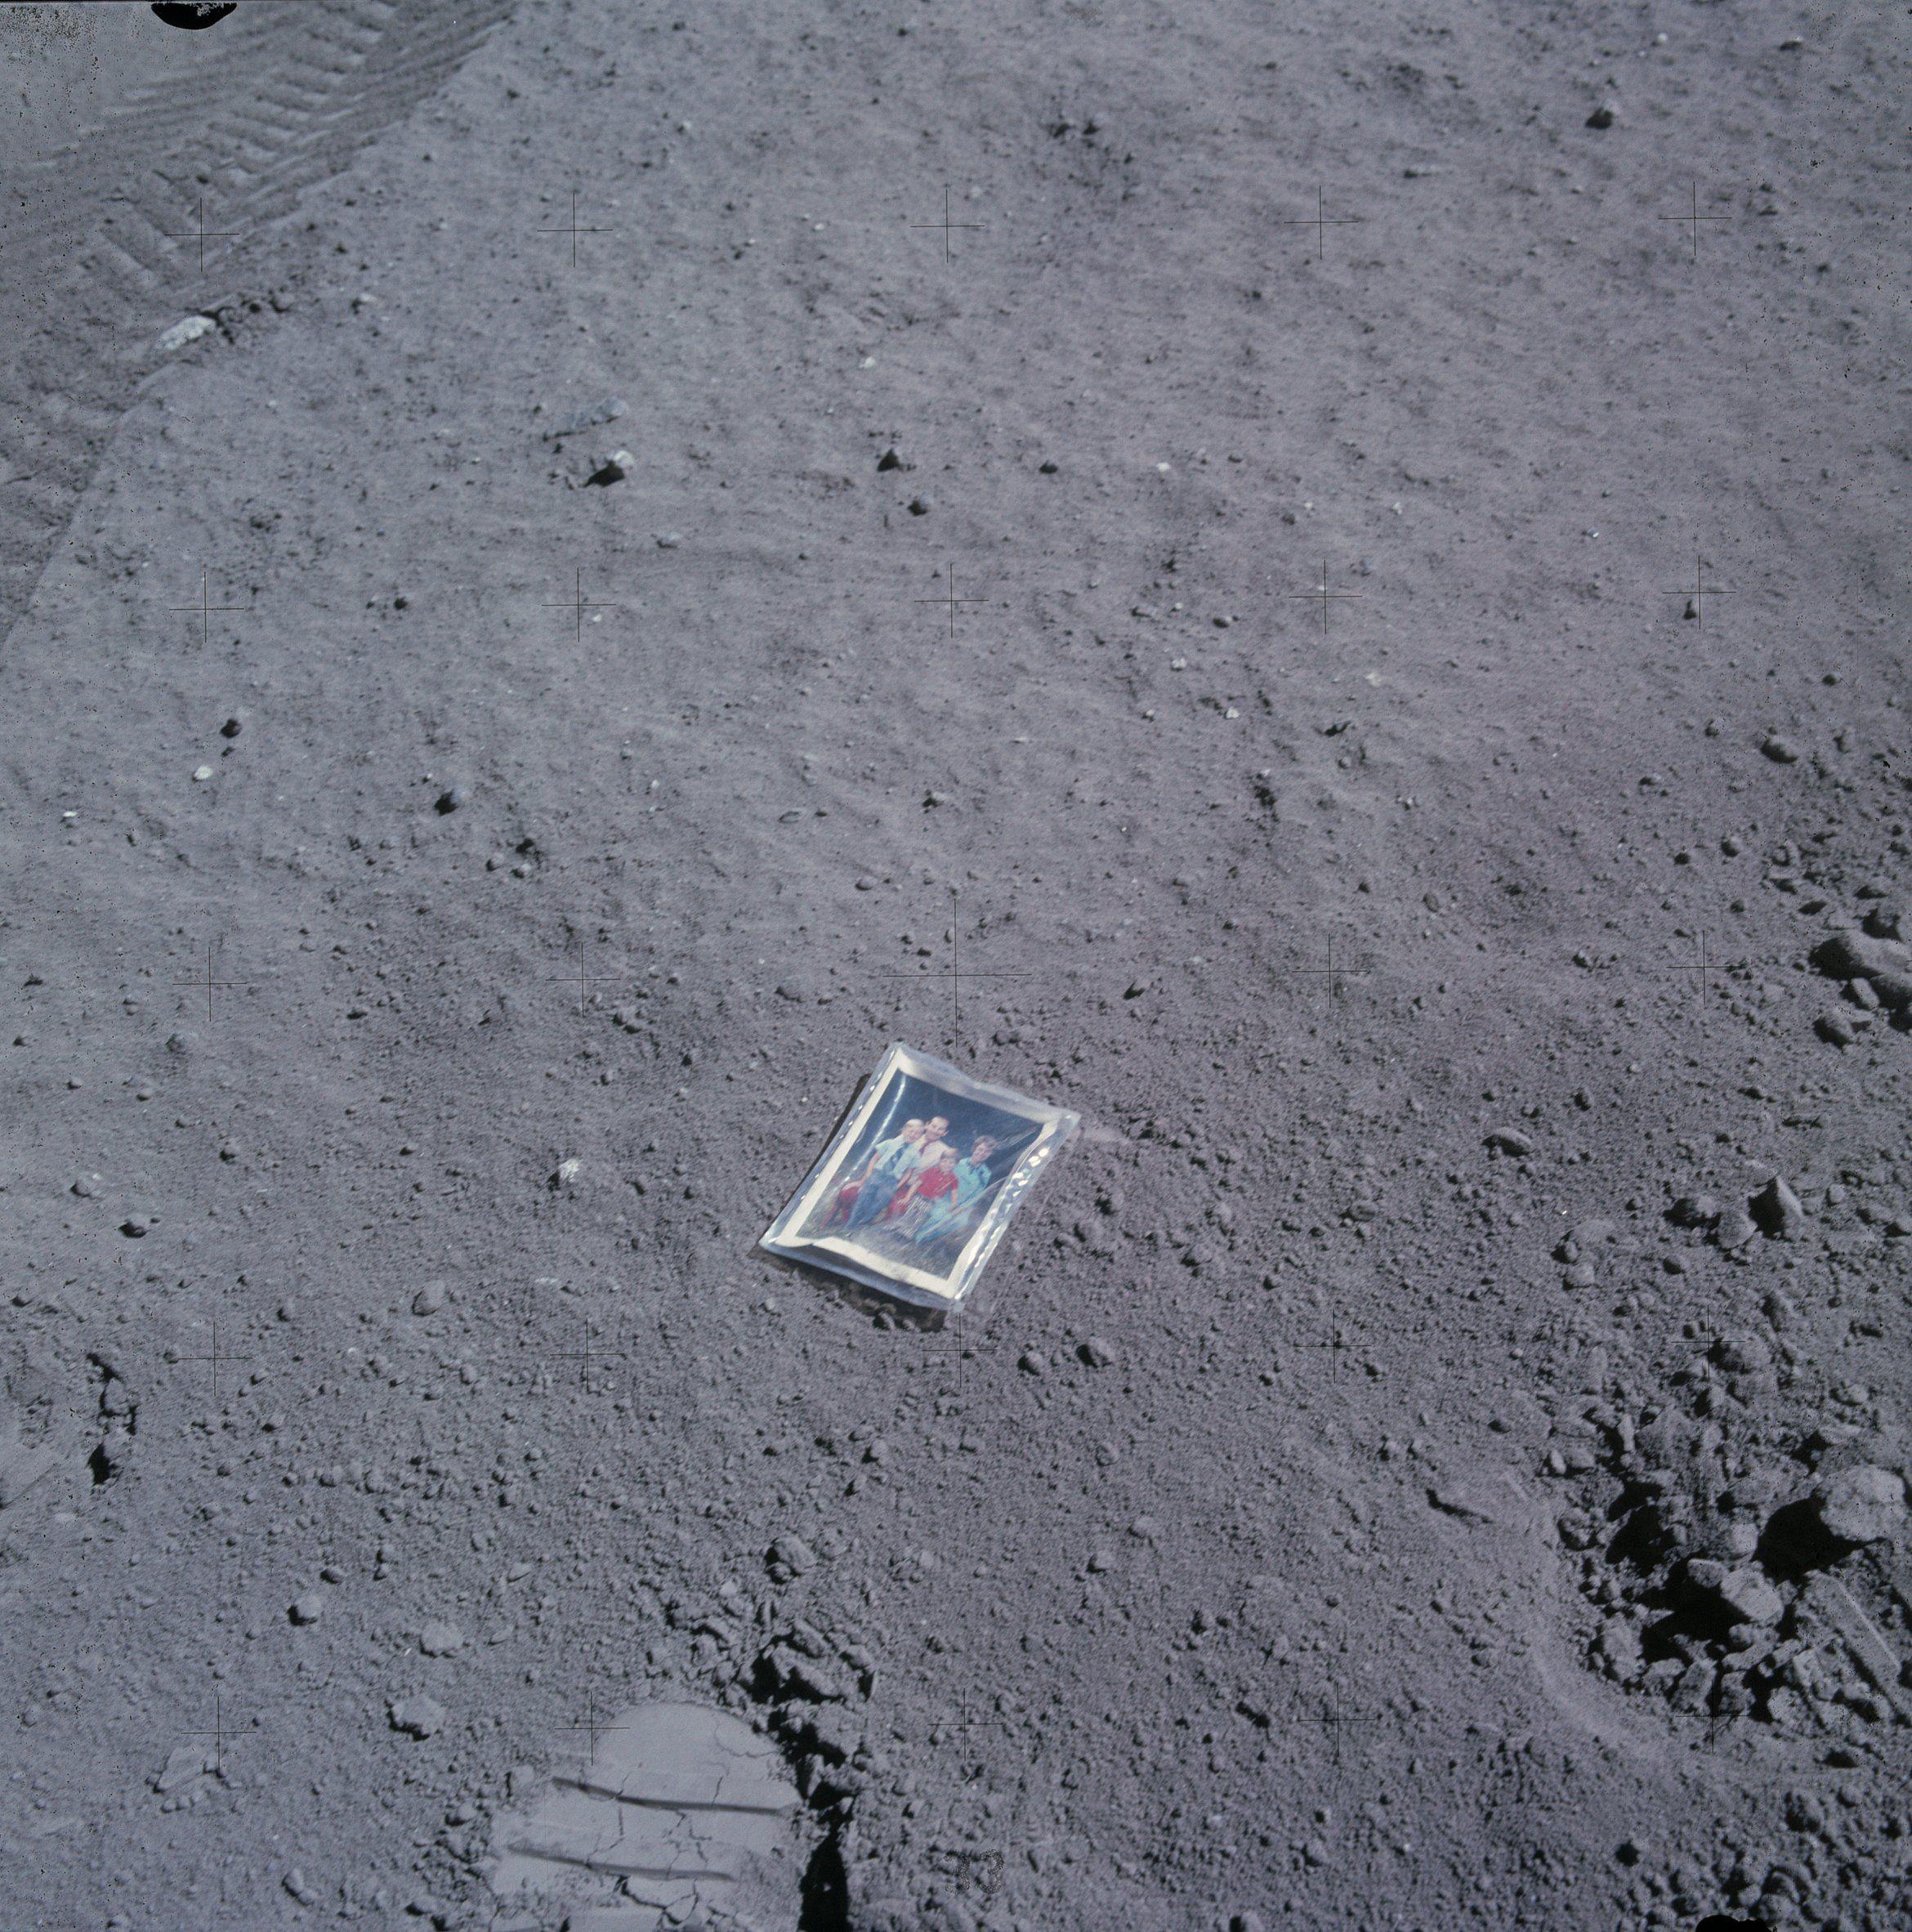 The Story of an Apollo 16 Astronaut Who Left a Family Photo on the Moon